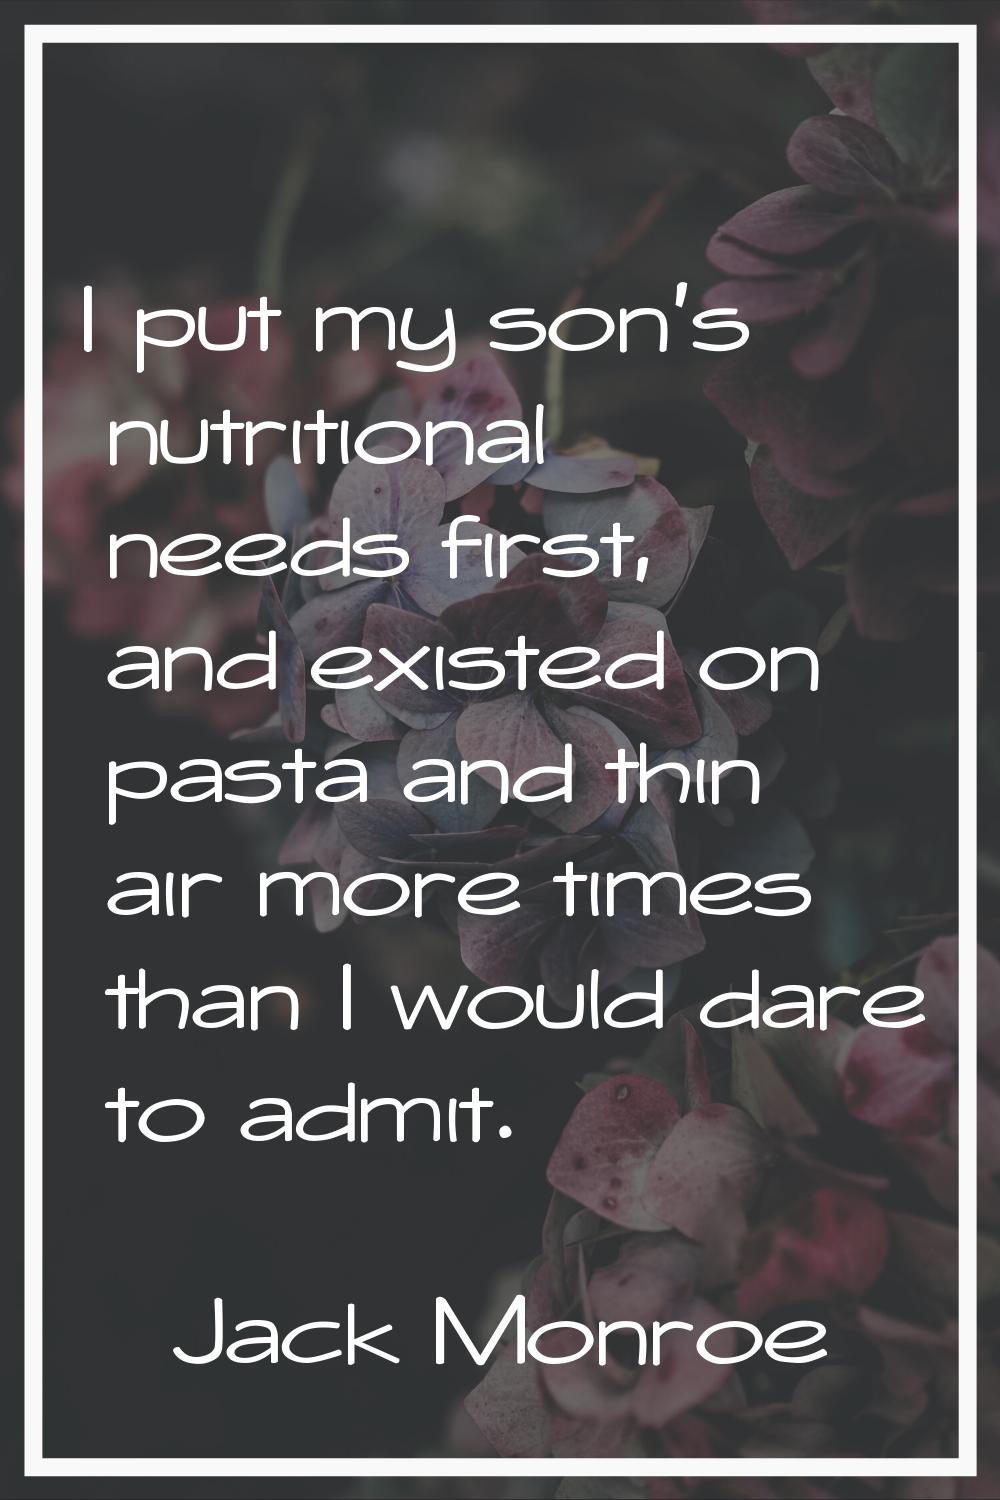 I put my son's nutritional needs first, and existed on pasta and thin air more times than I would d